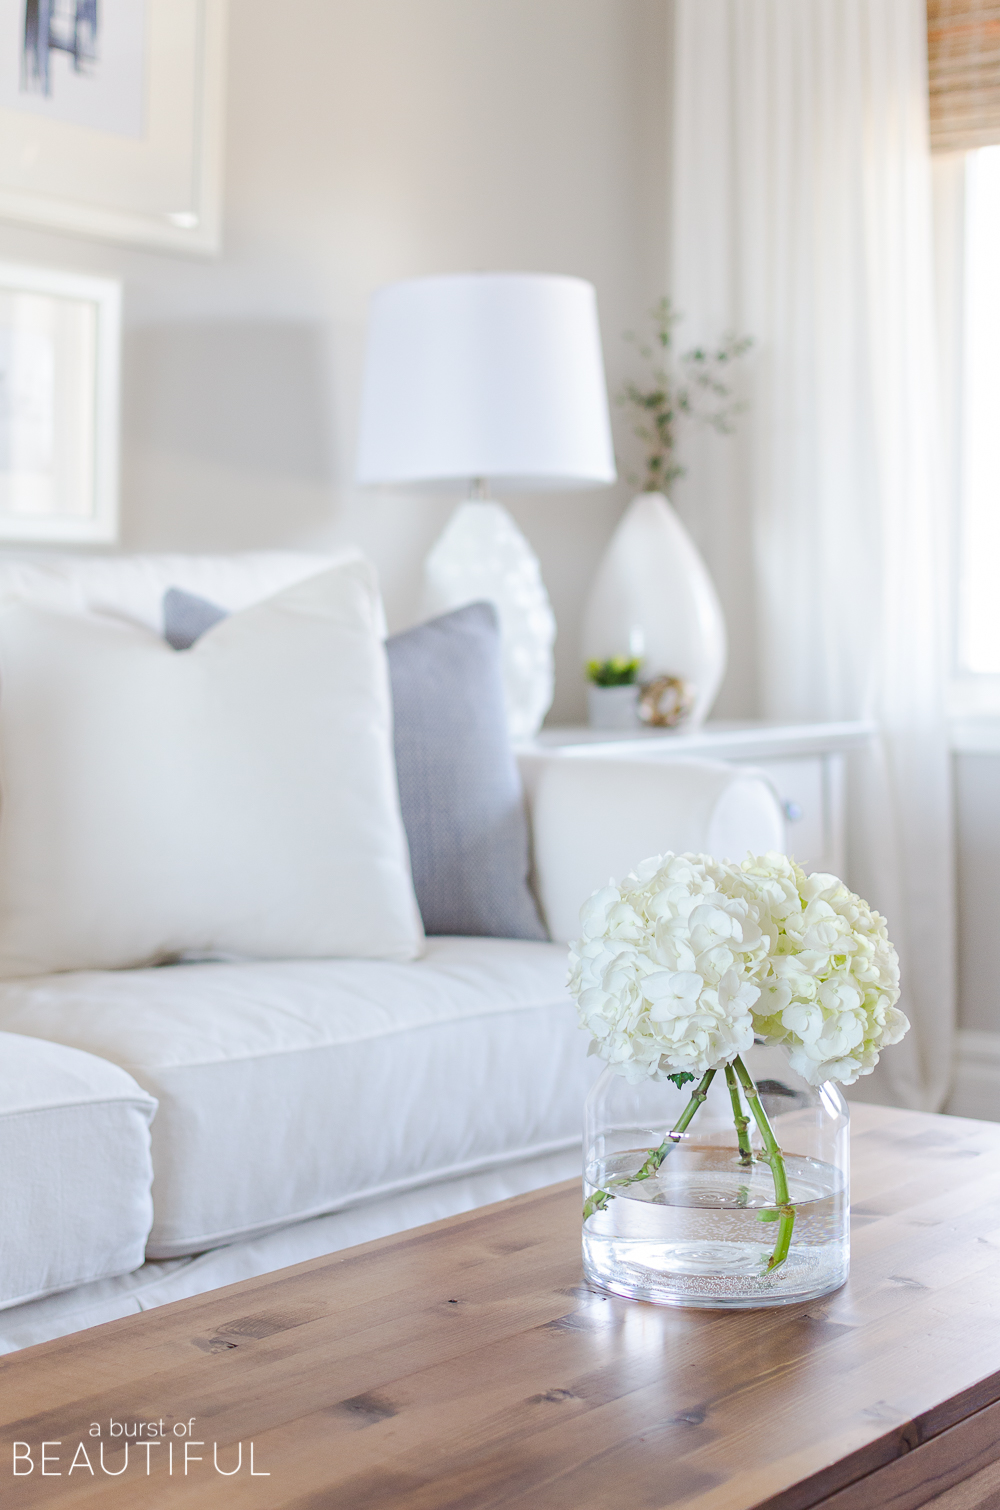 A few subtle changes are all you need to welcome the spring season into your home. Join us on our spring home tour, along with 25 other bloggers to find inspiration and spring decor ideas.